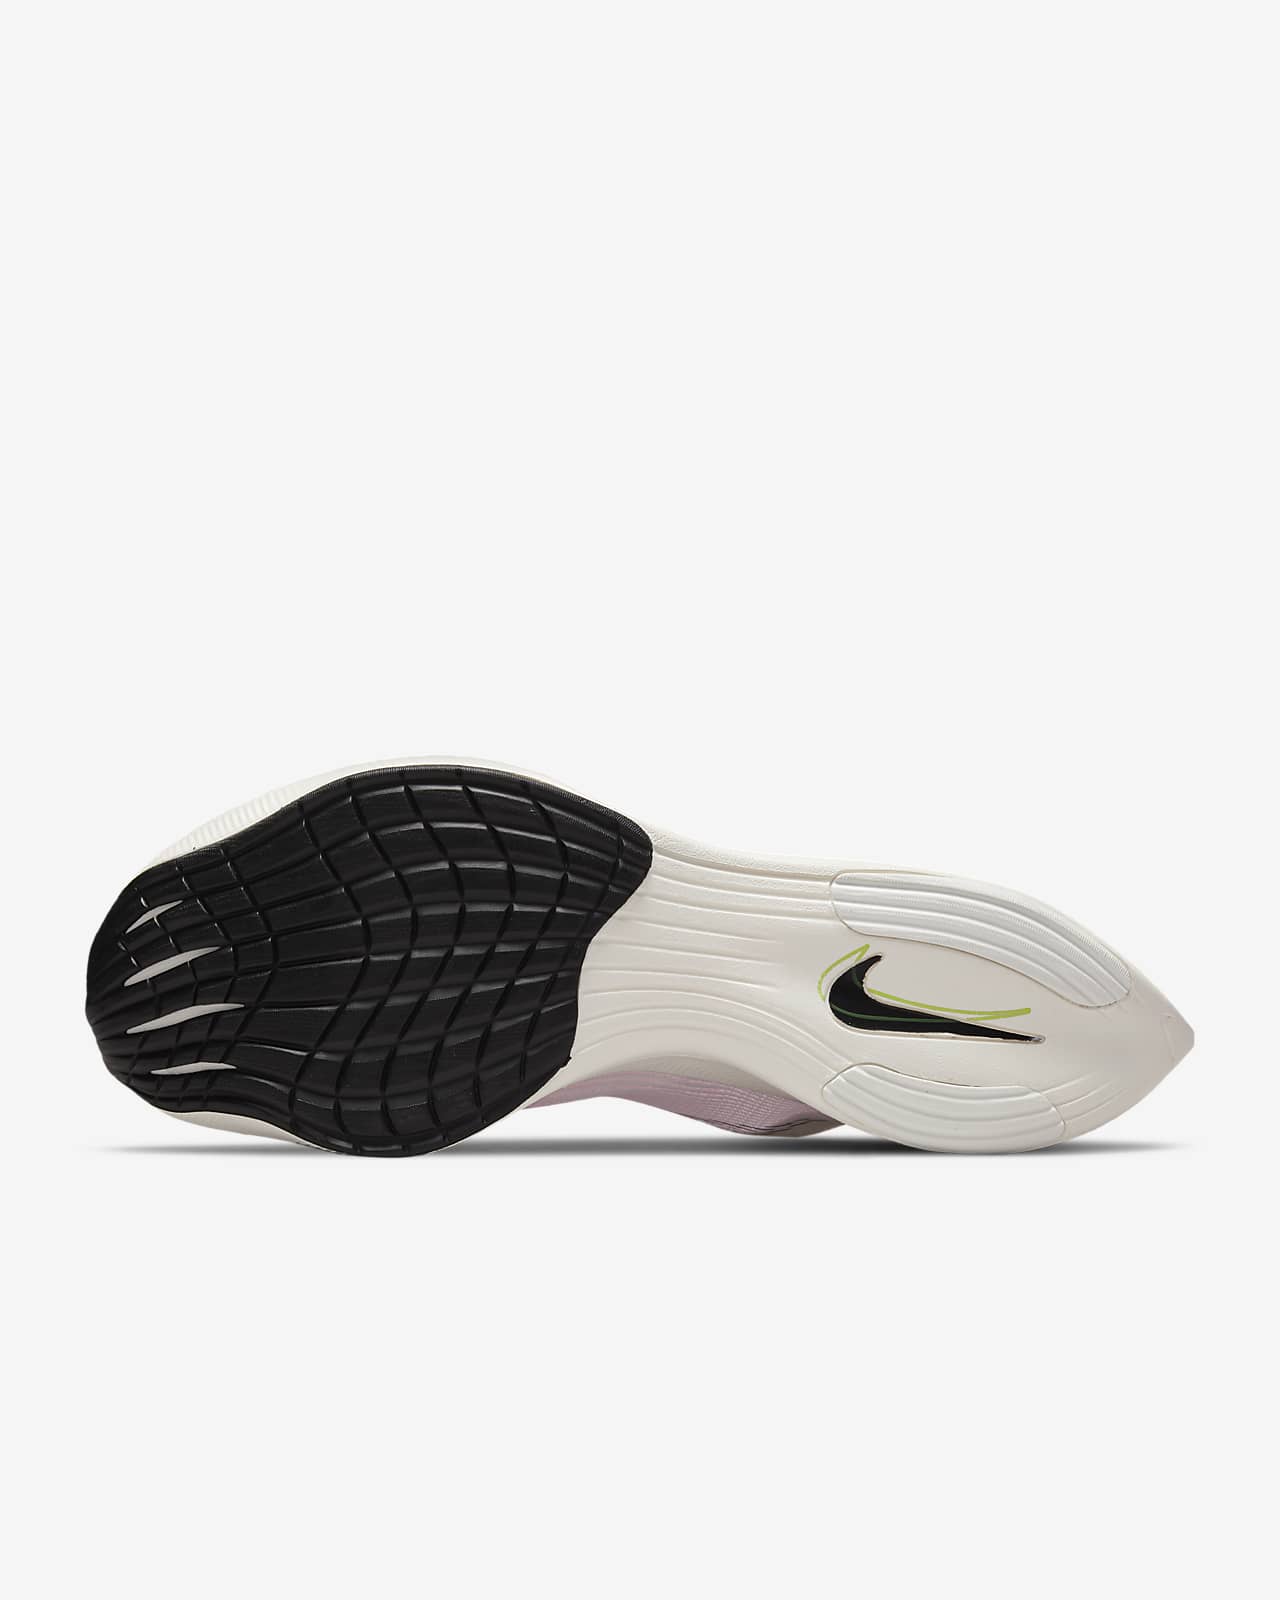 vaporfly running shoes price in india